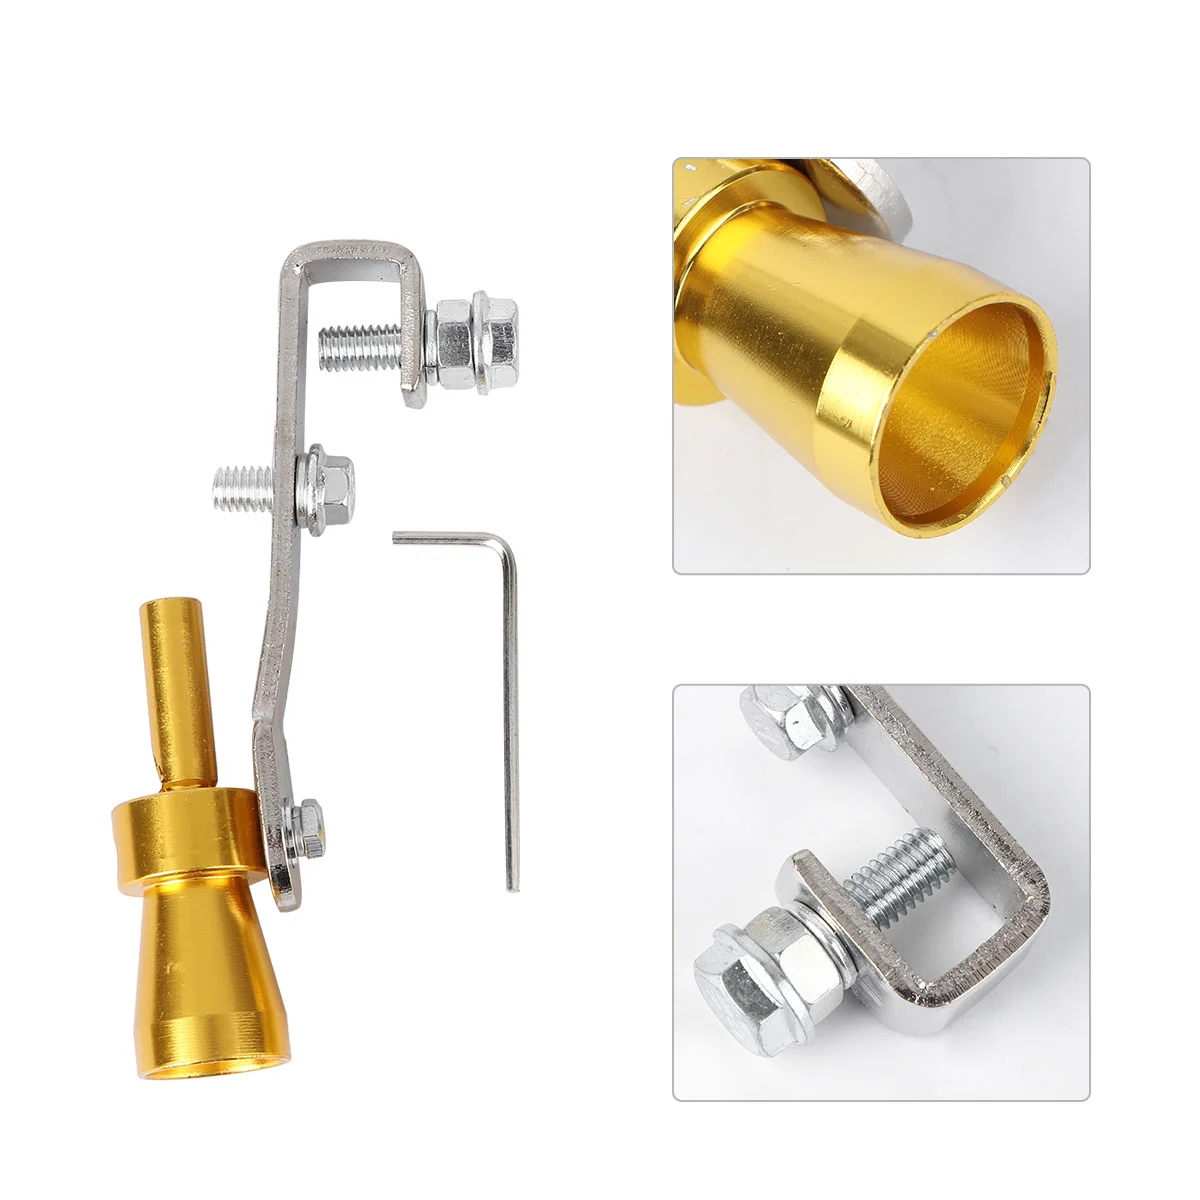 

2PCS Exhaust Pipe Sounder Car Tuning Turbine Whistle Sounder Tail - Size XL (Golden)